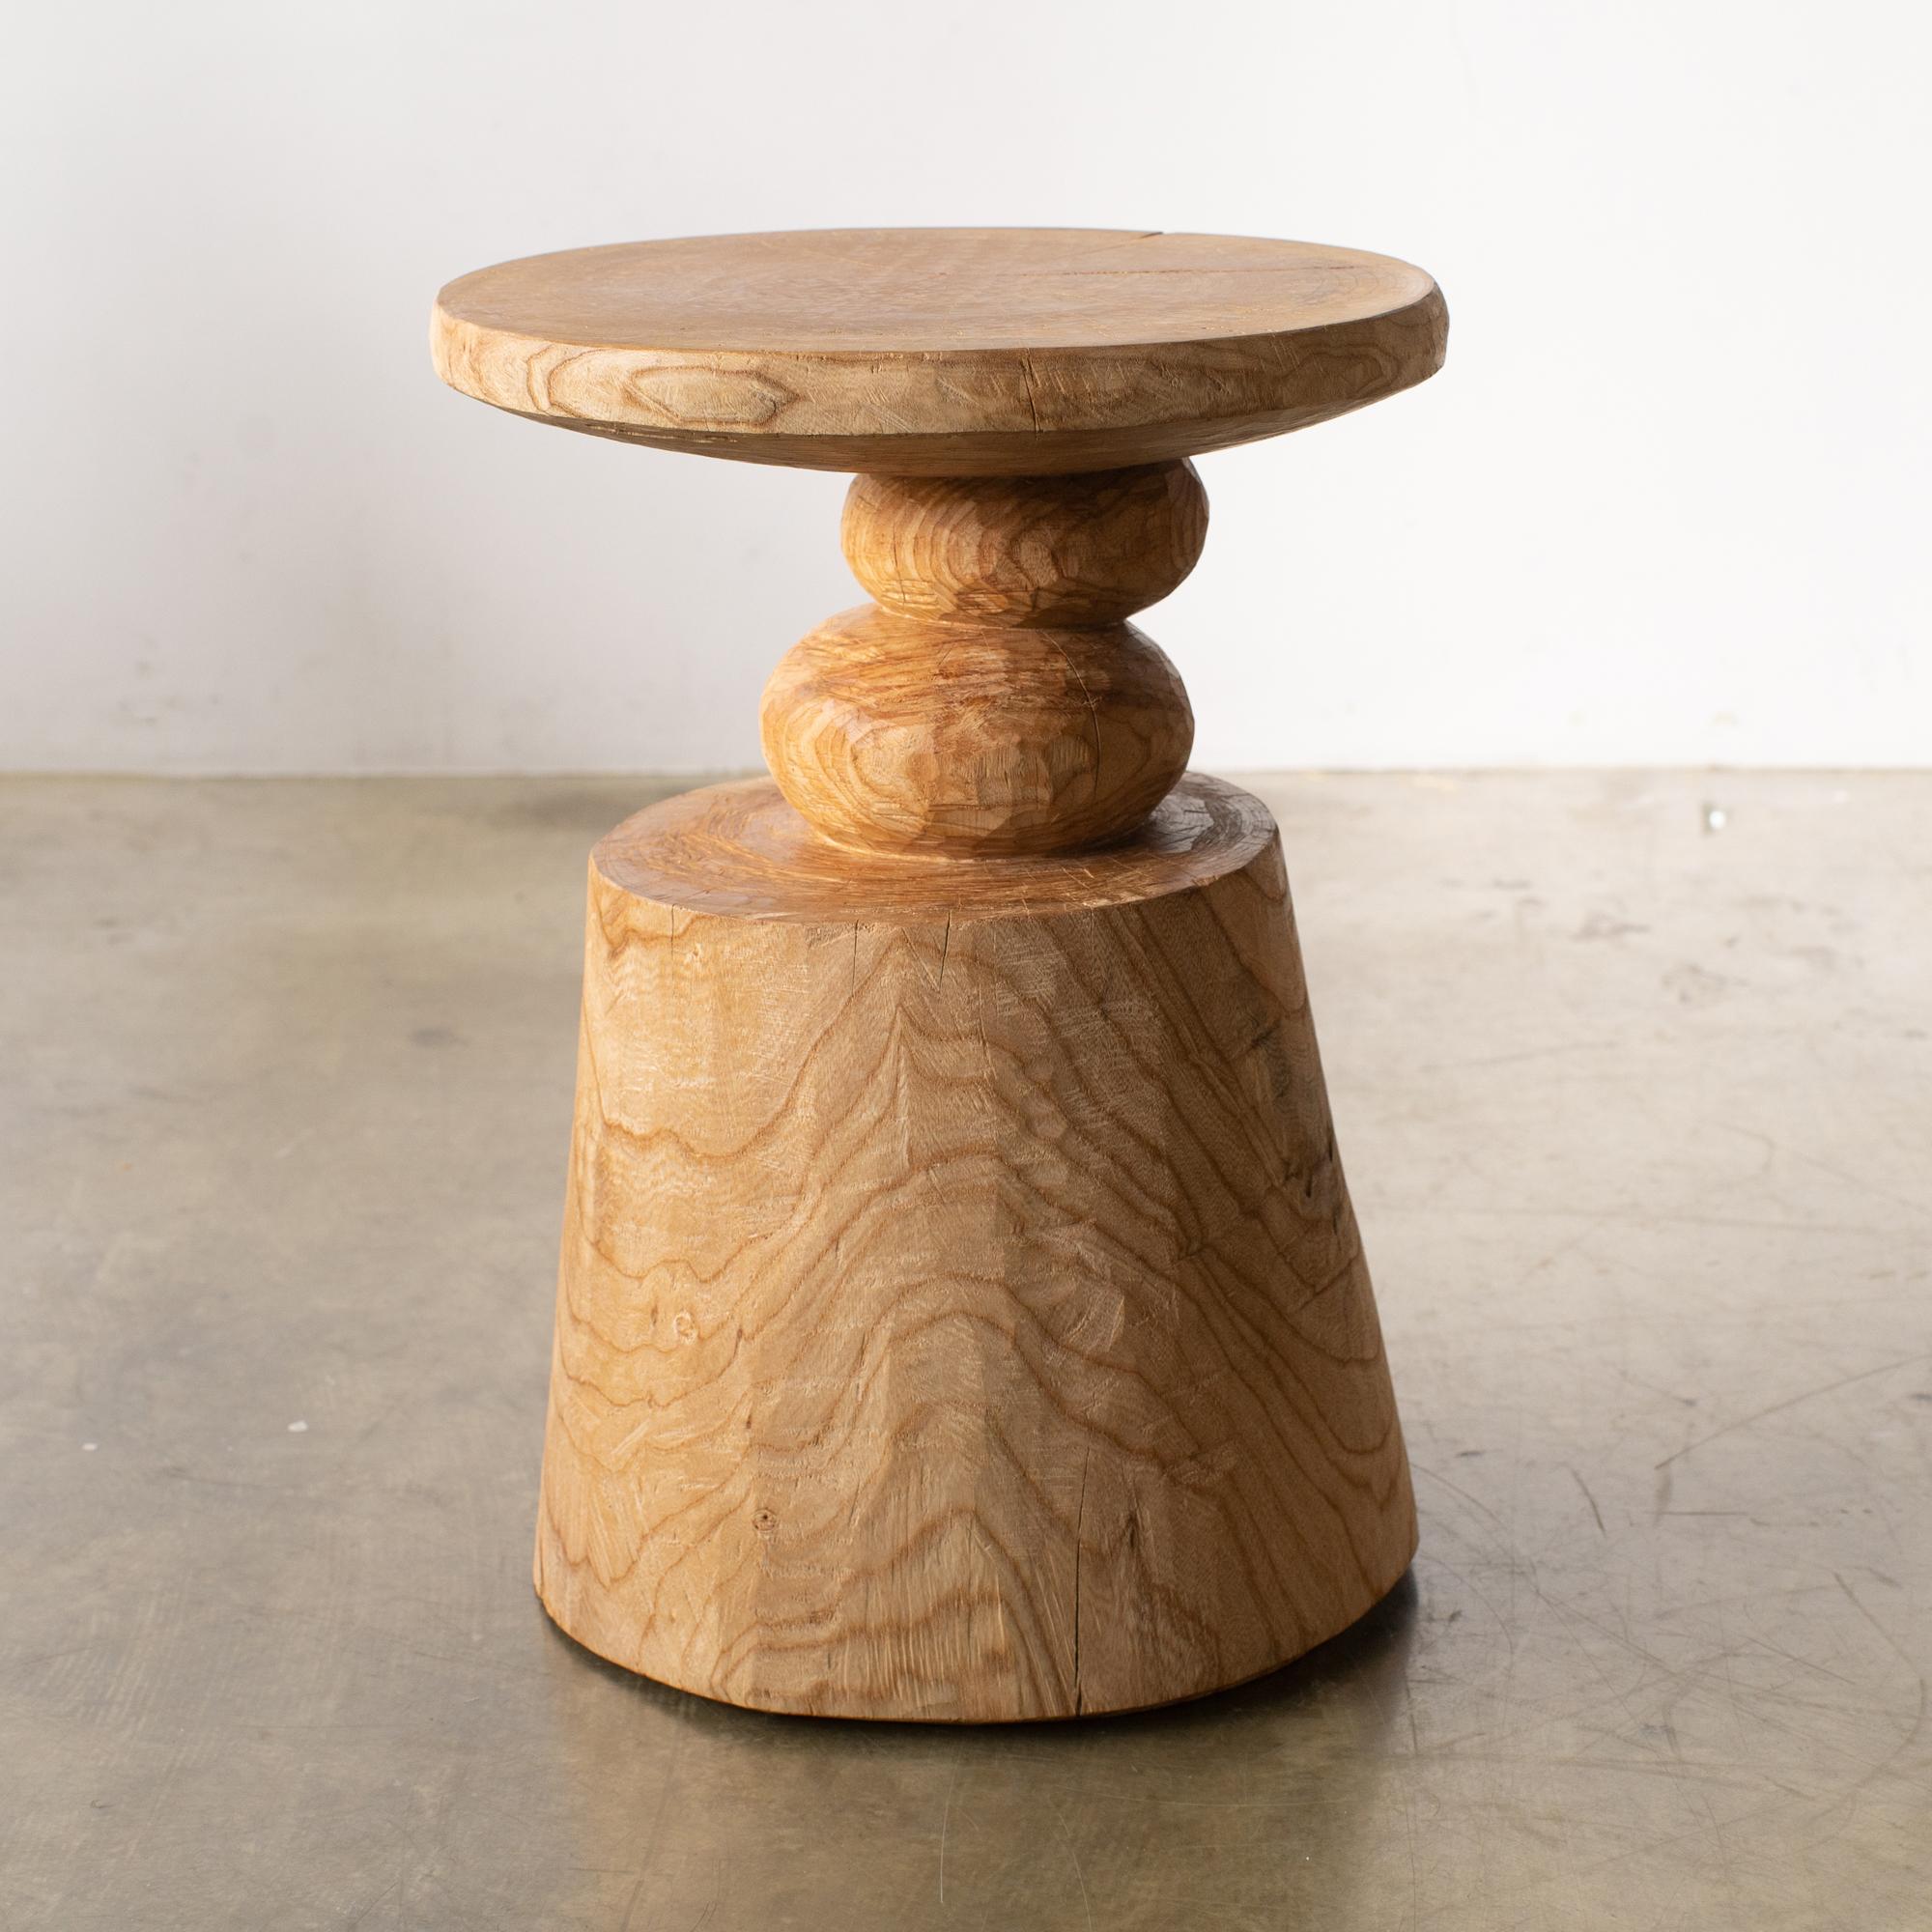 Hand-Carved Hiroyuki Nishimura and Zougei Furniture Sculptural Stool table 20 Tribal Zen For Sale